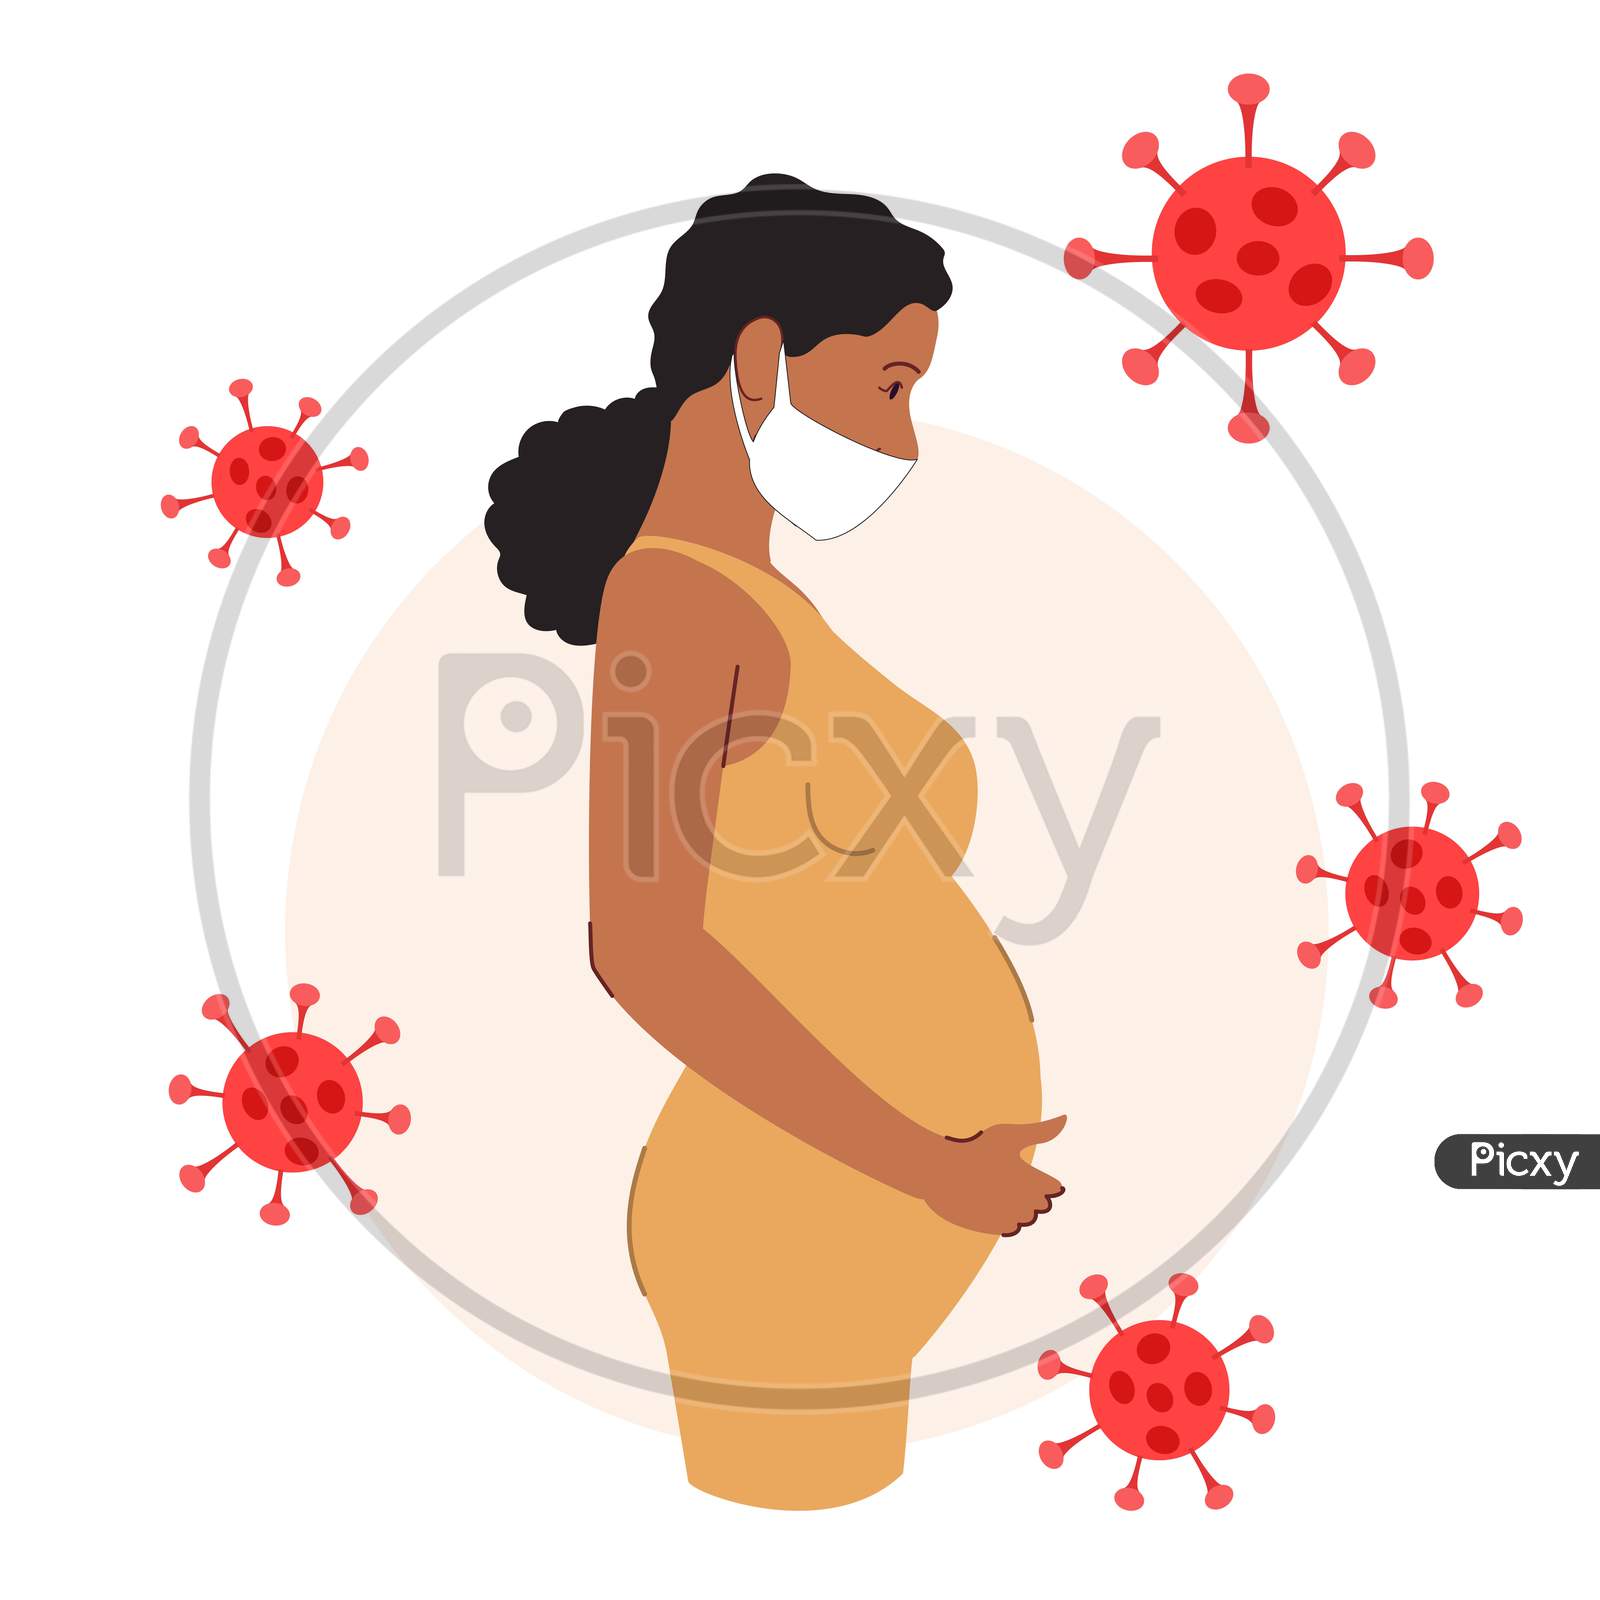 A Pregnant Woman Wearing a Mask with a Corona Background